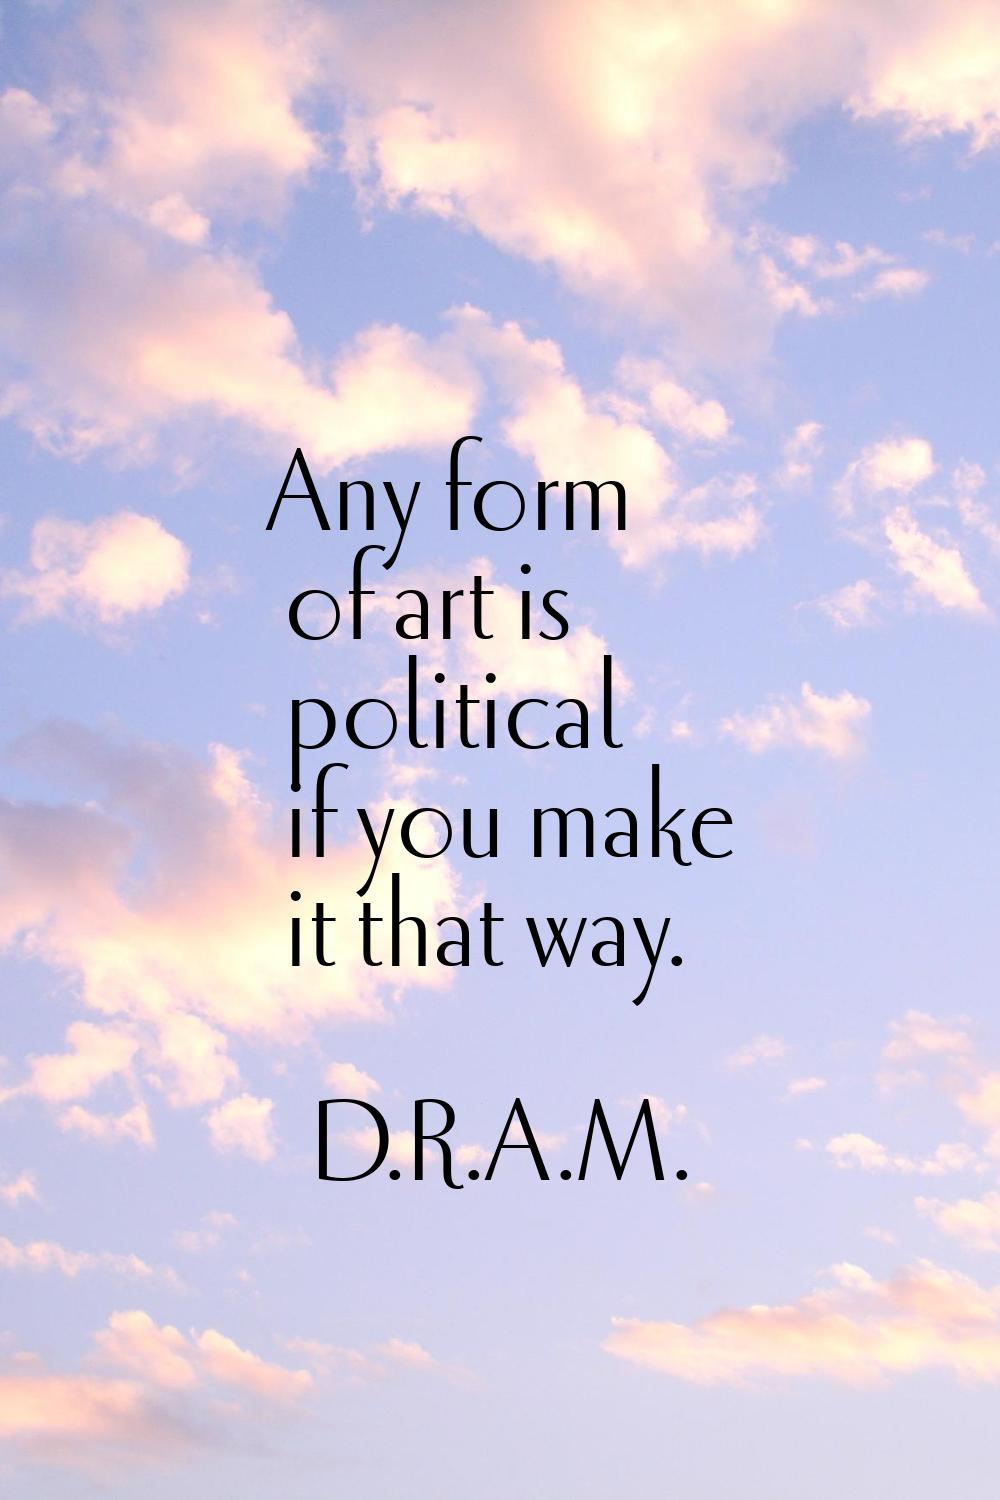 Any form of art is political if you make it that way.